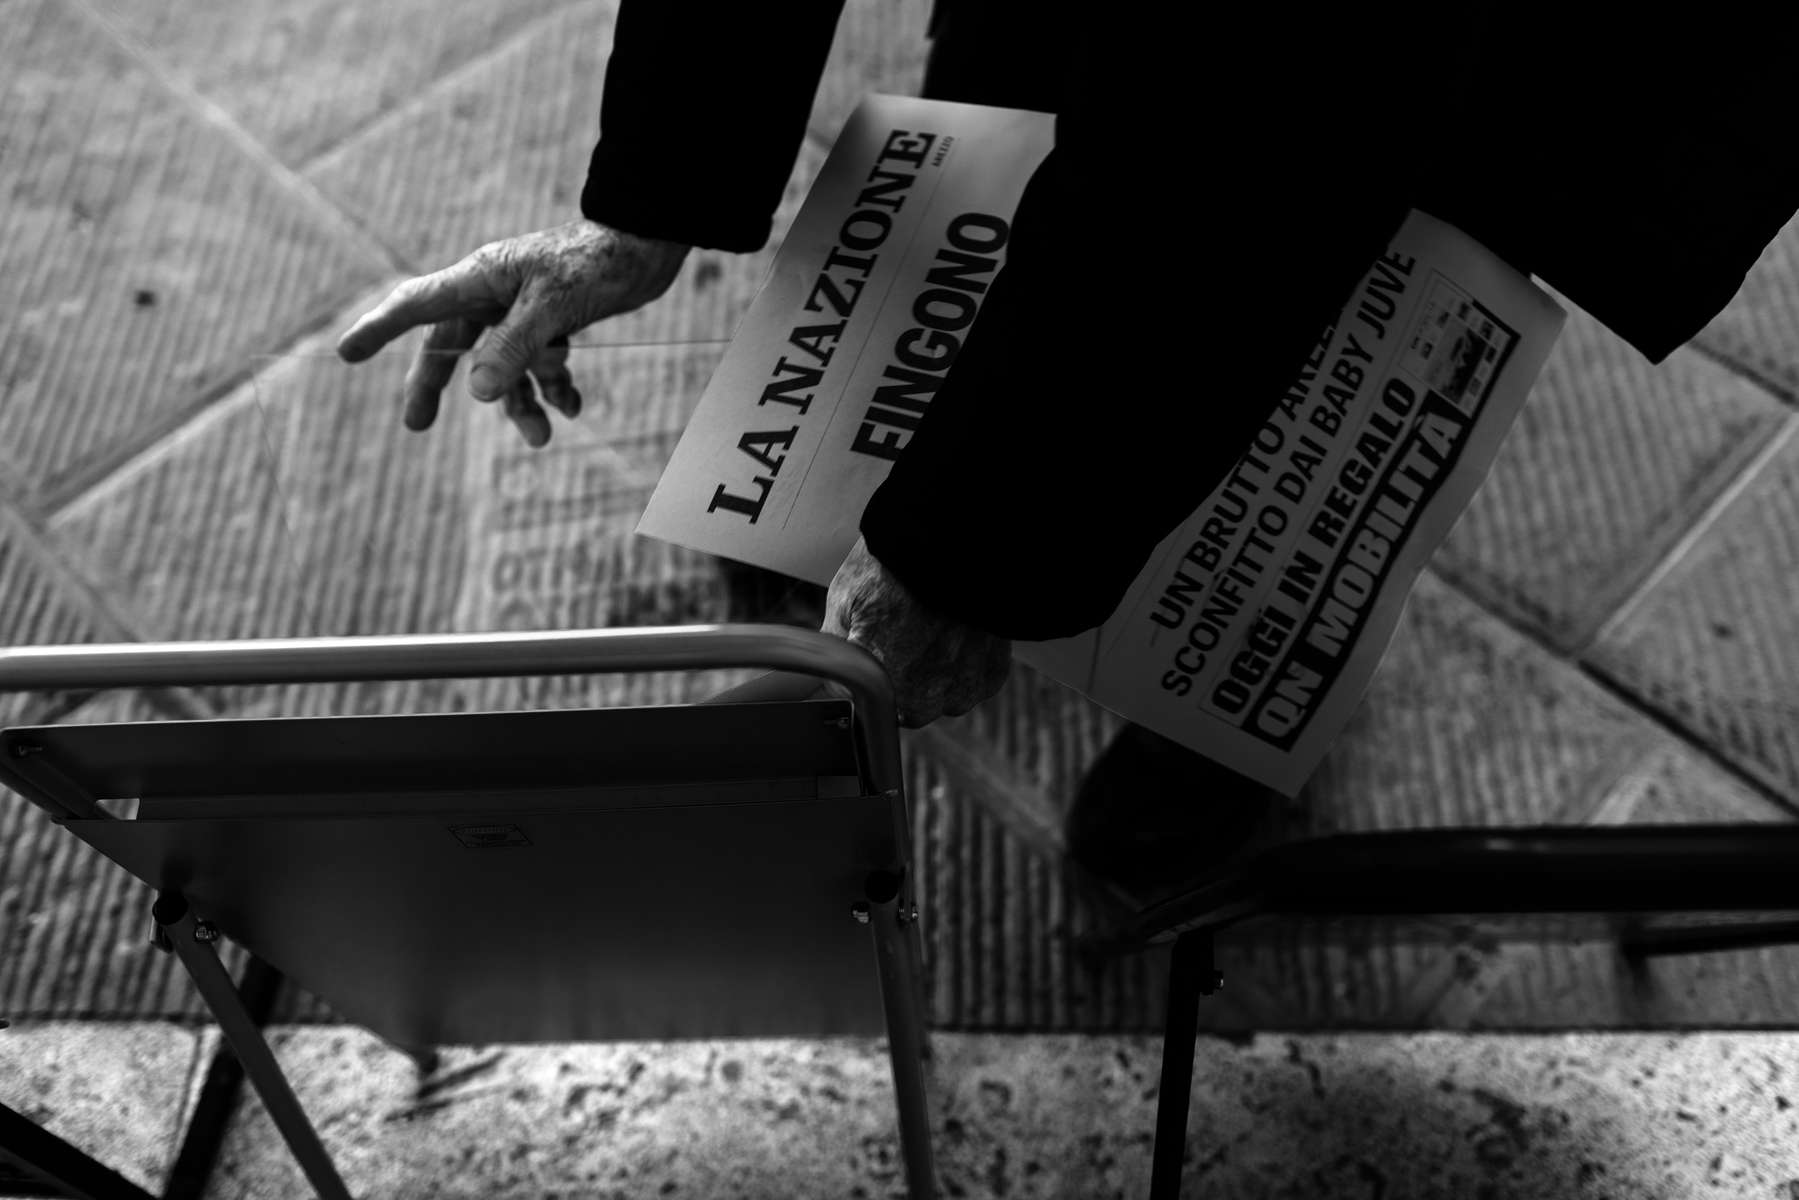 On November 26, 2023, Piero Scartoni puts the day’s headlines from La Nazione (the Nation) into a newsstand marquis. “Fingono,” (They pretend) reads the headline.  Published since 1859, La Nazione is Italy’s oldest continually published newspaper and predates Italy’s unification by two years.   